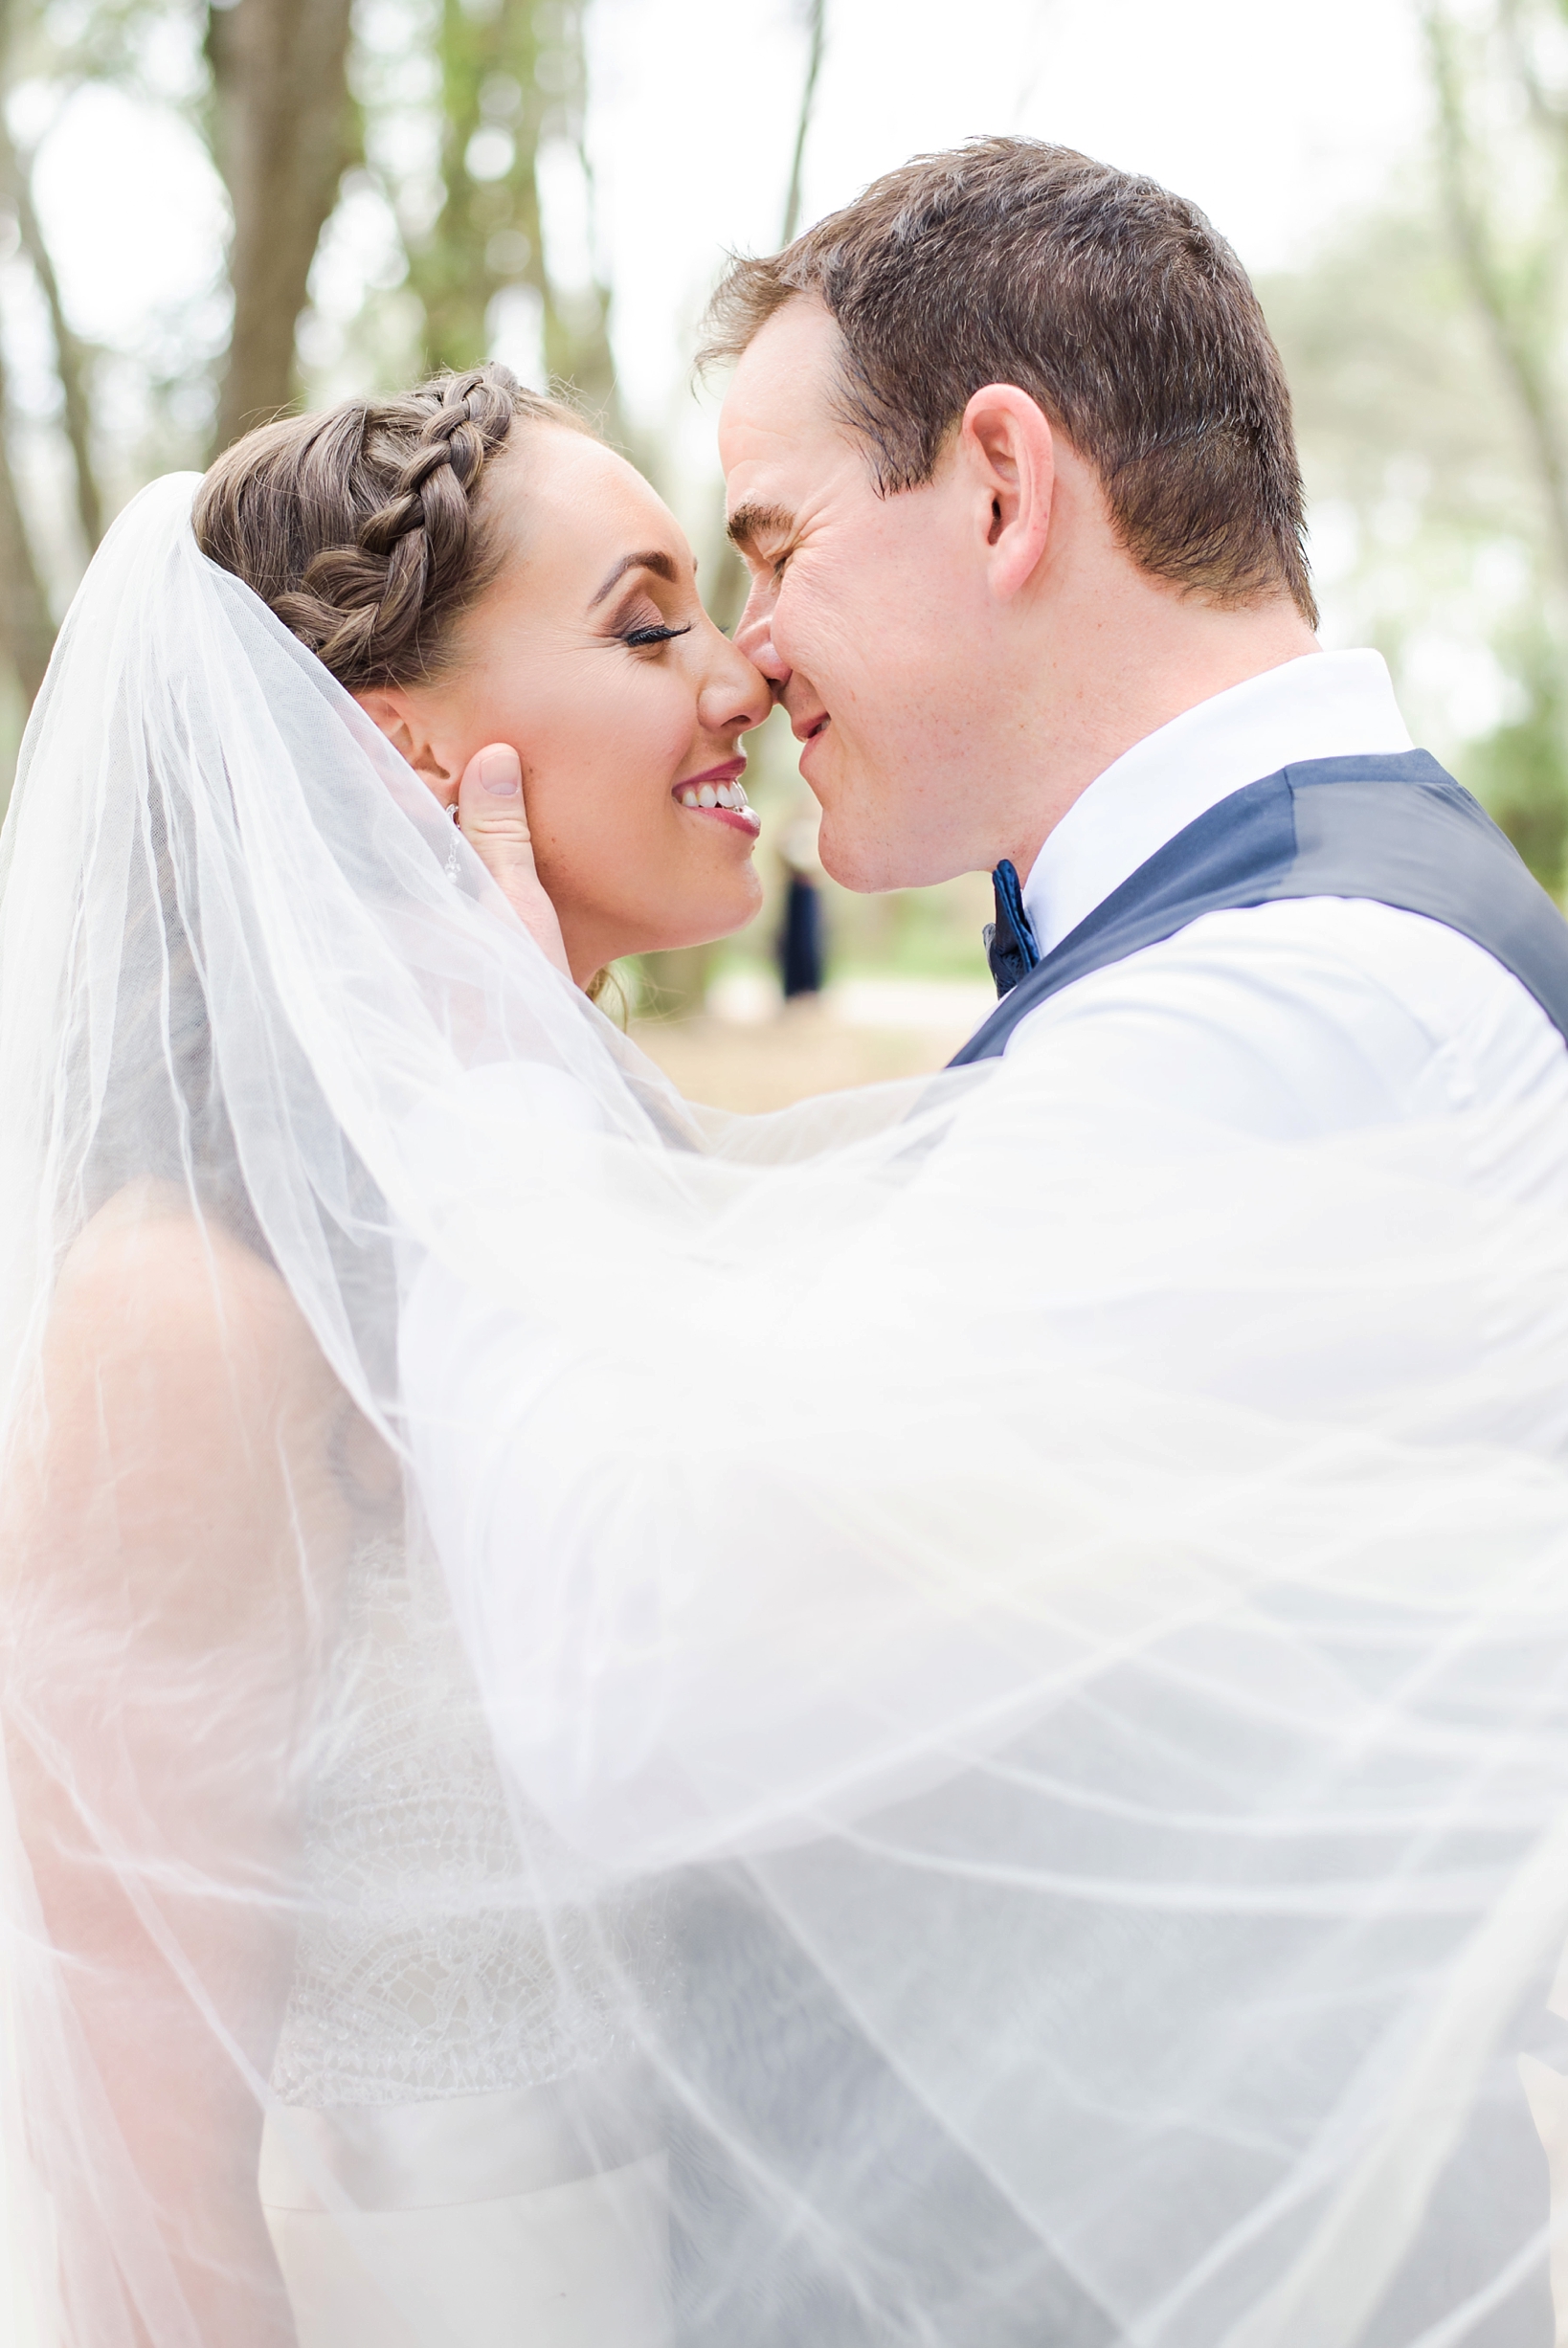 Bride and Groom smiling while they kiss as the wind blows the veil around them